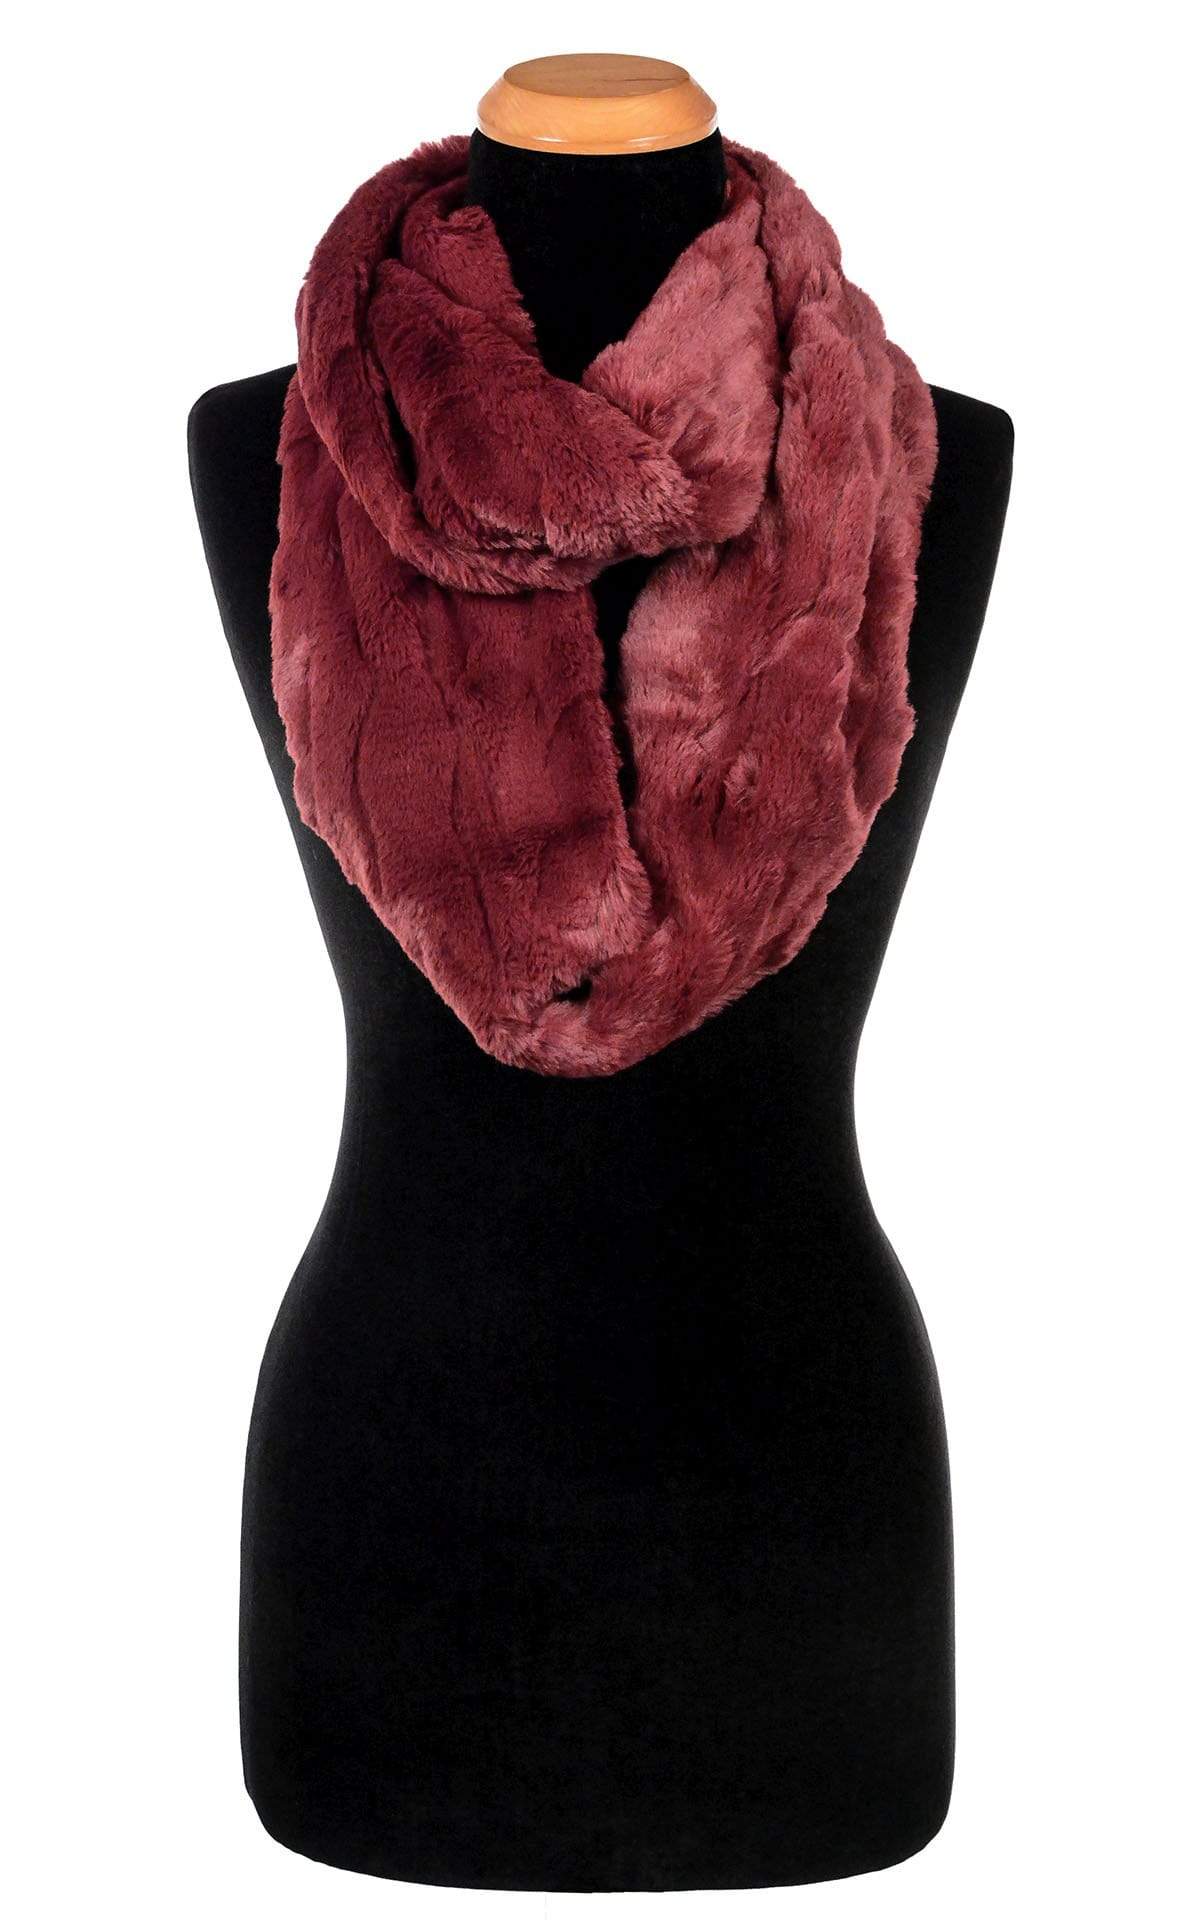 Infinity Scarf - Luxury Faux Fur In Cranberry Creek  (Limited Availability!)